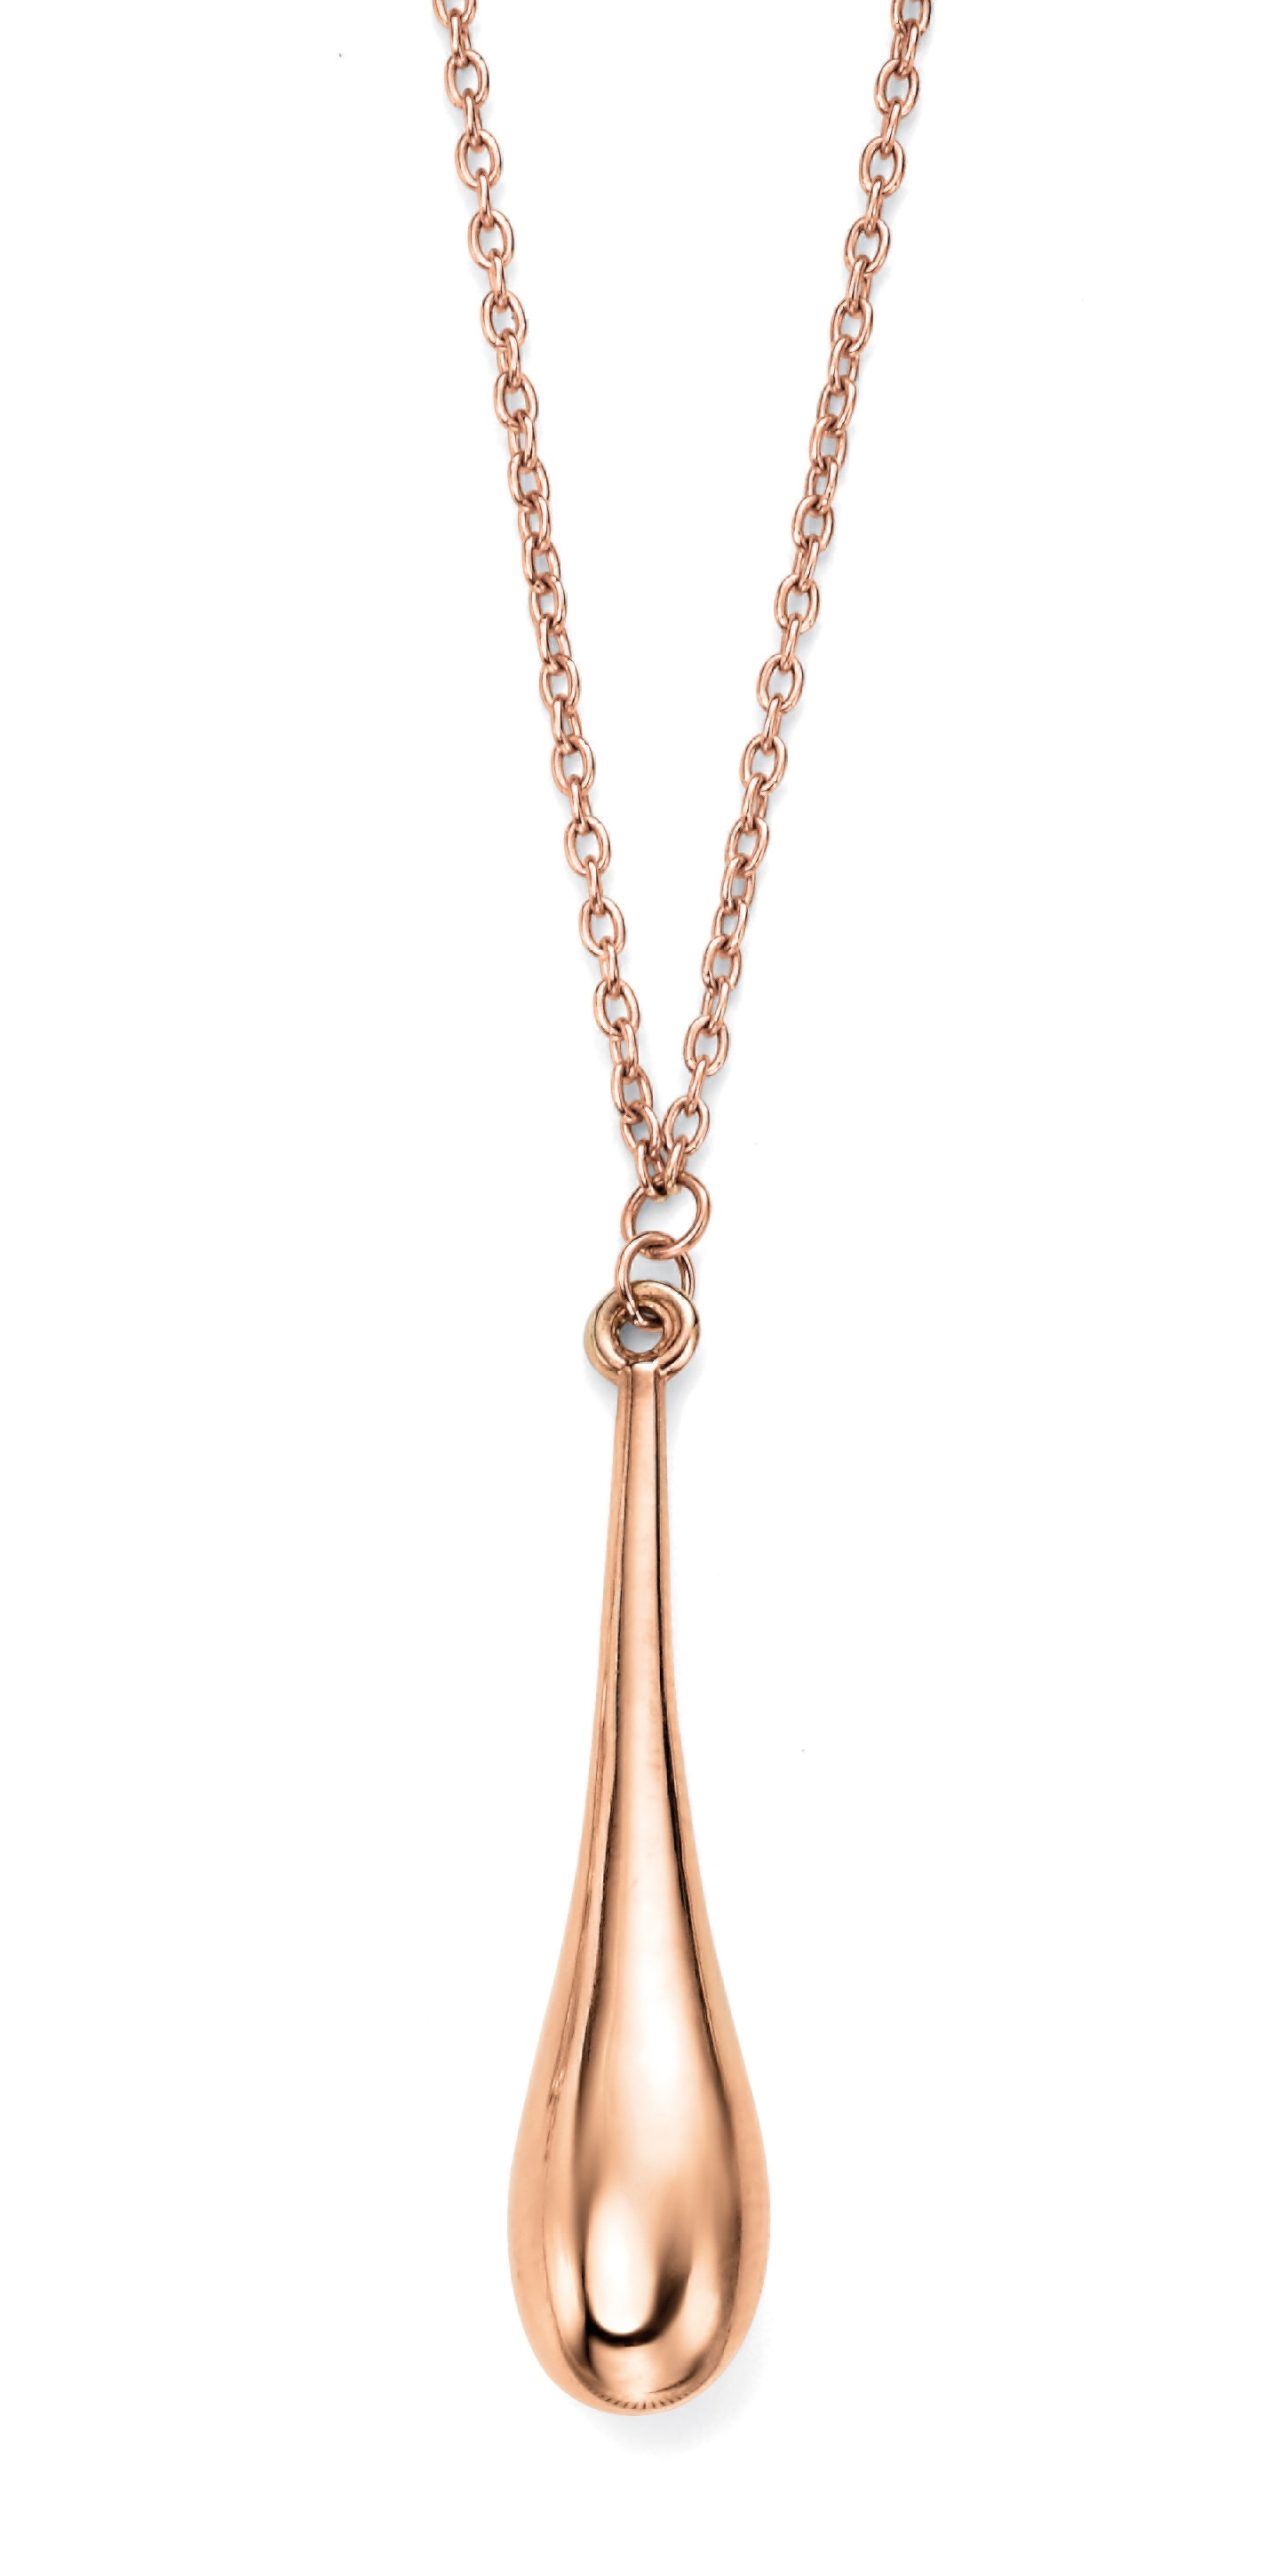 9ct Rose Gold Drop Pendant | Hoppers Jewellers